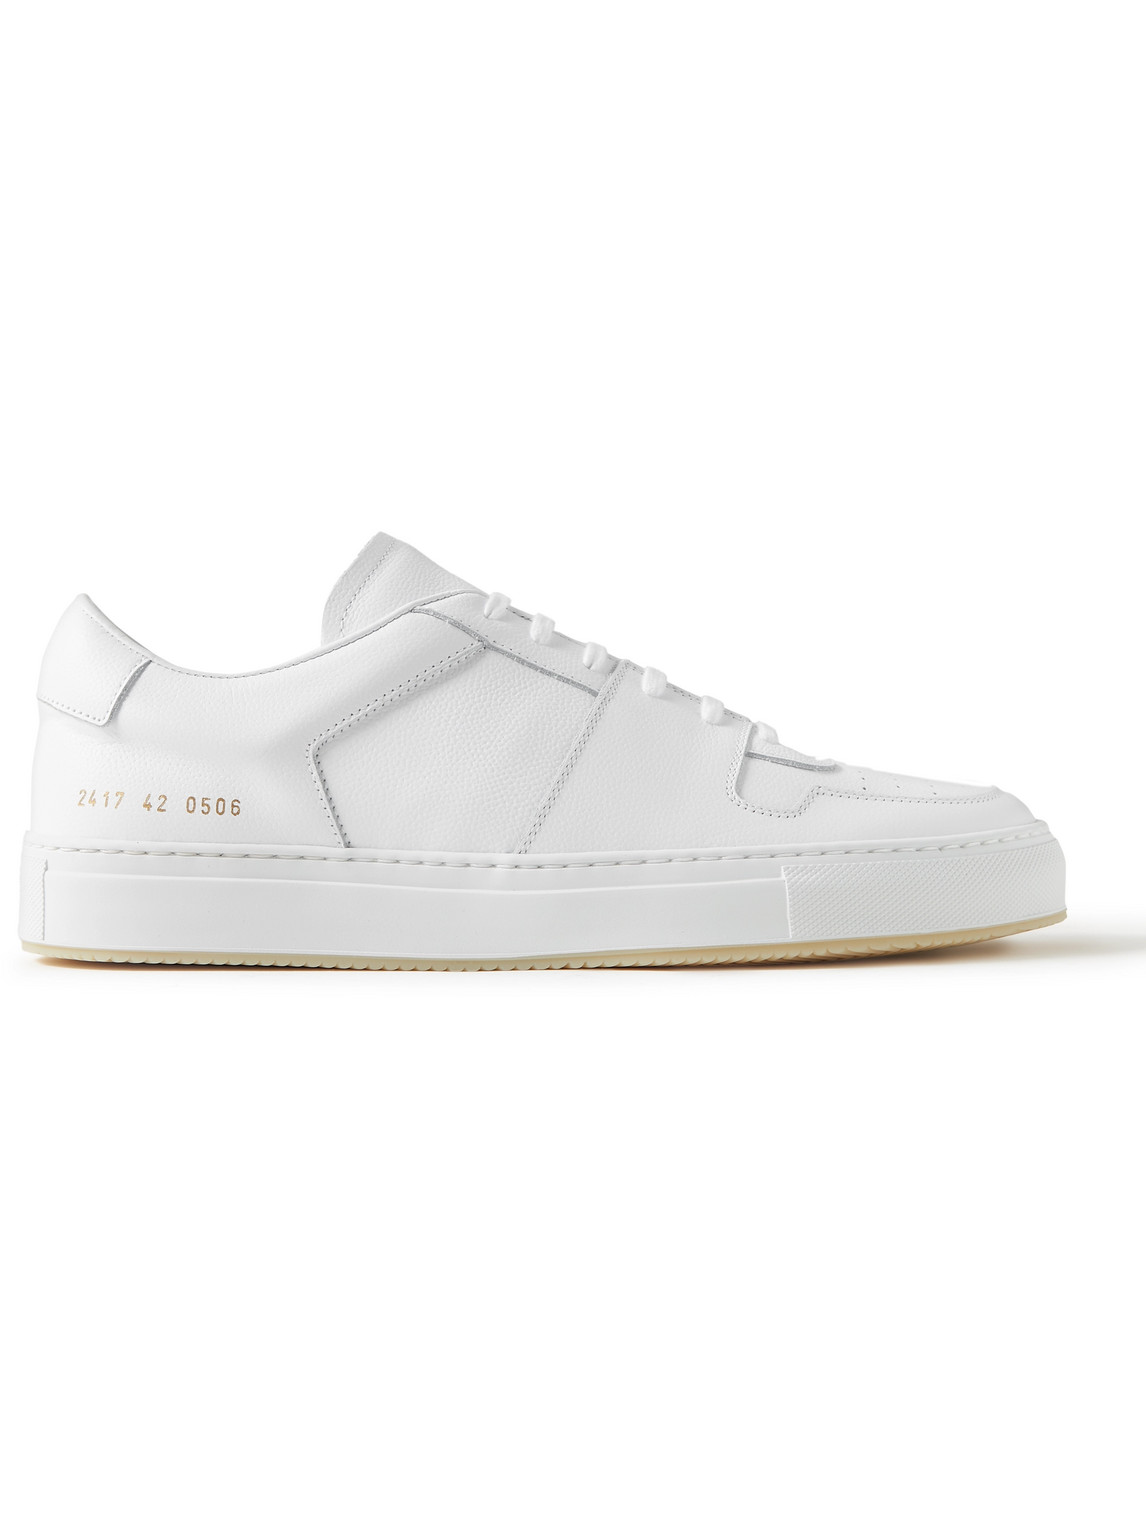 COMMON PROJECTS DECADES FULL-GRAIN LEATHER SNEAKERS